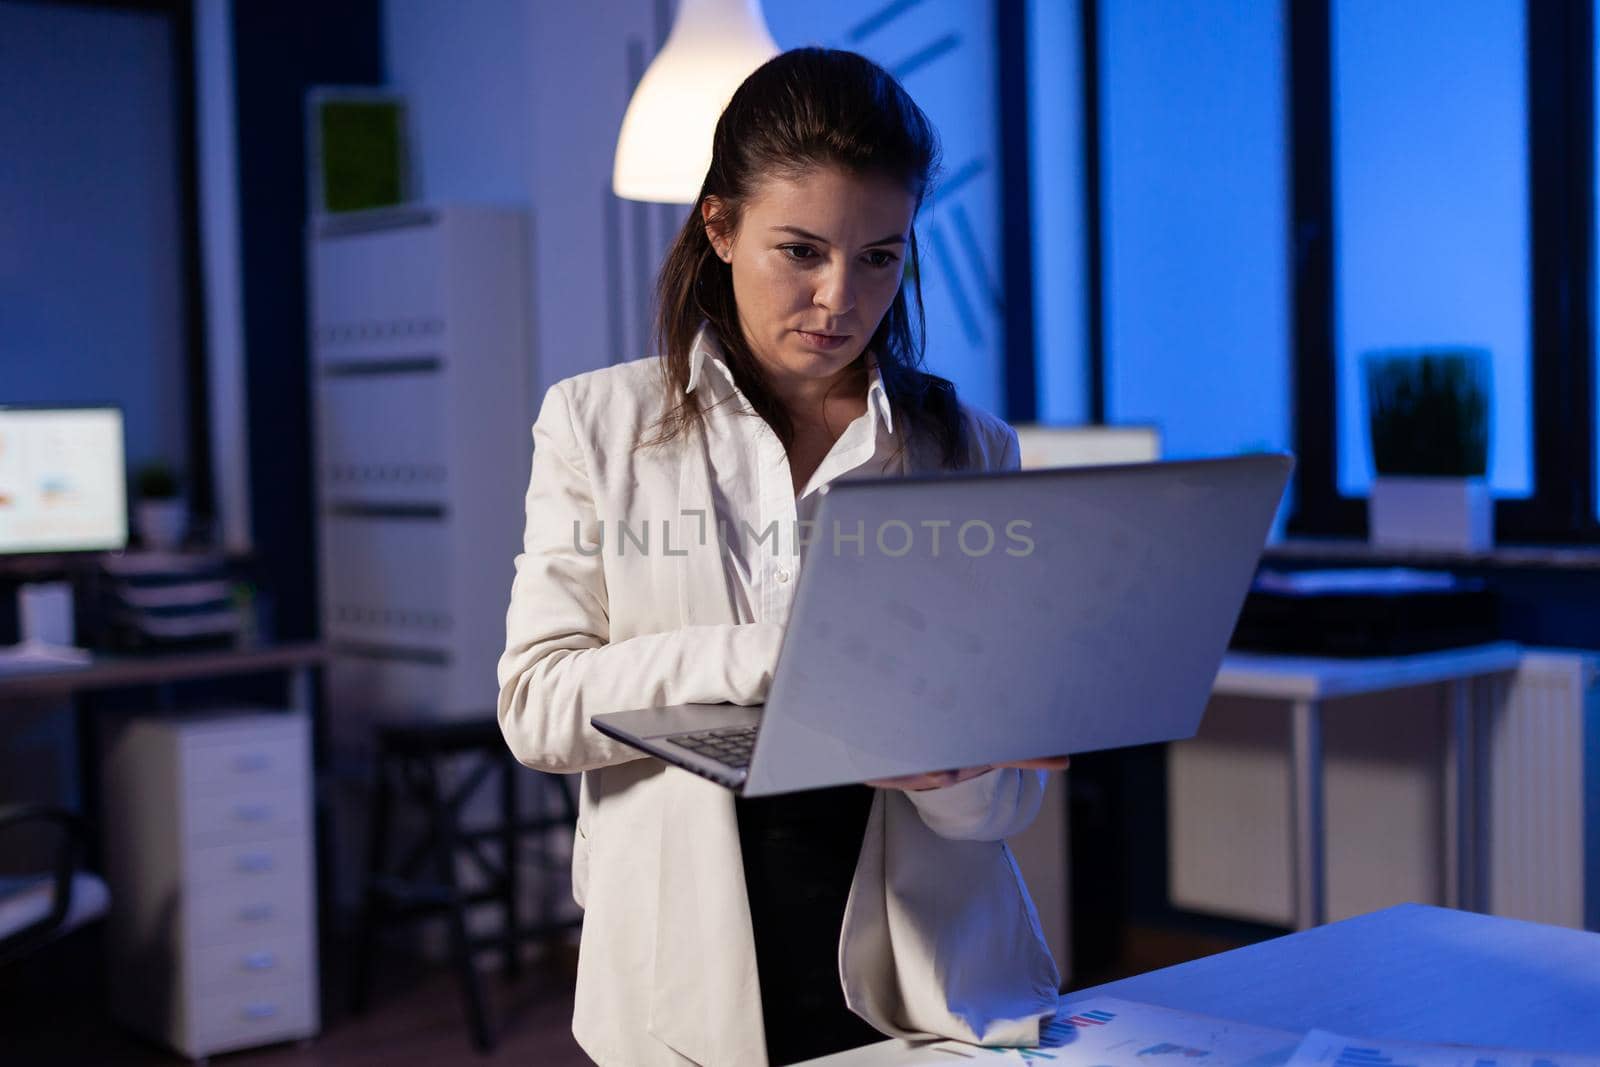 Tired entrepreneur analysing financial reports standing in start up office holding professional laptop. Focused employee calculate marketing profit late at night using modern technology network